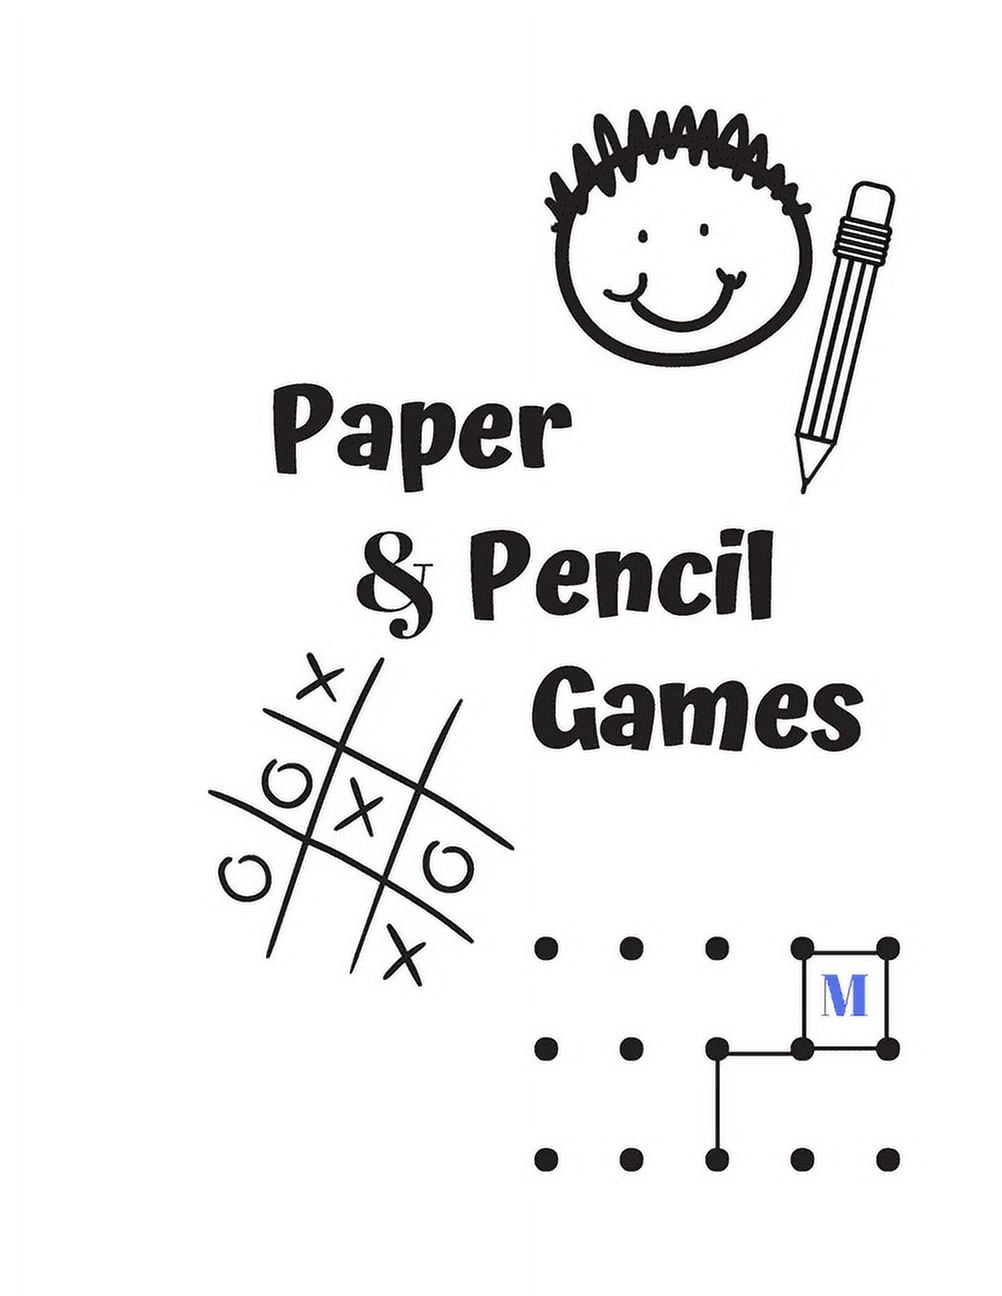 Fun Paper and Pencil Games to Play